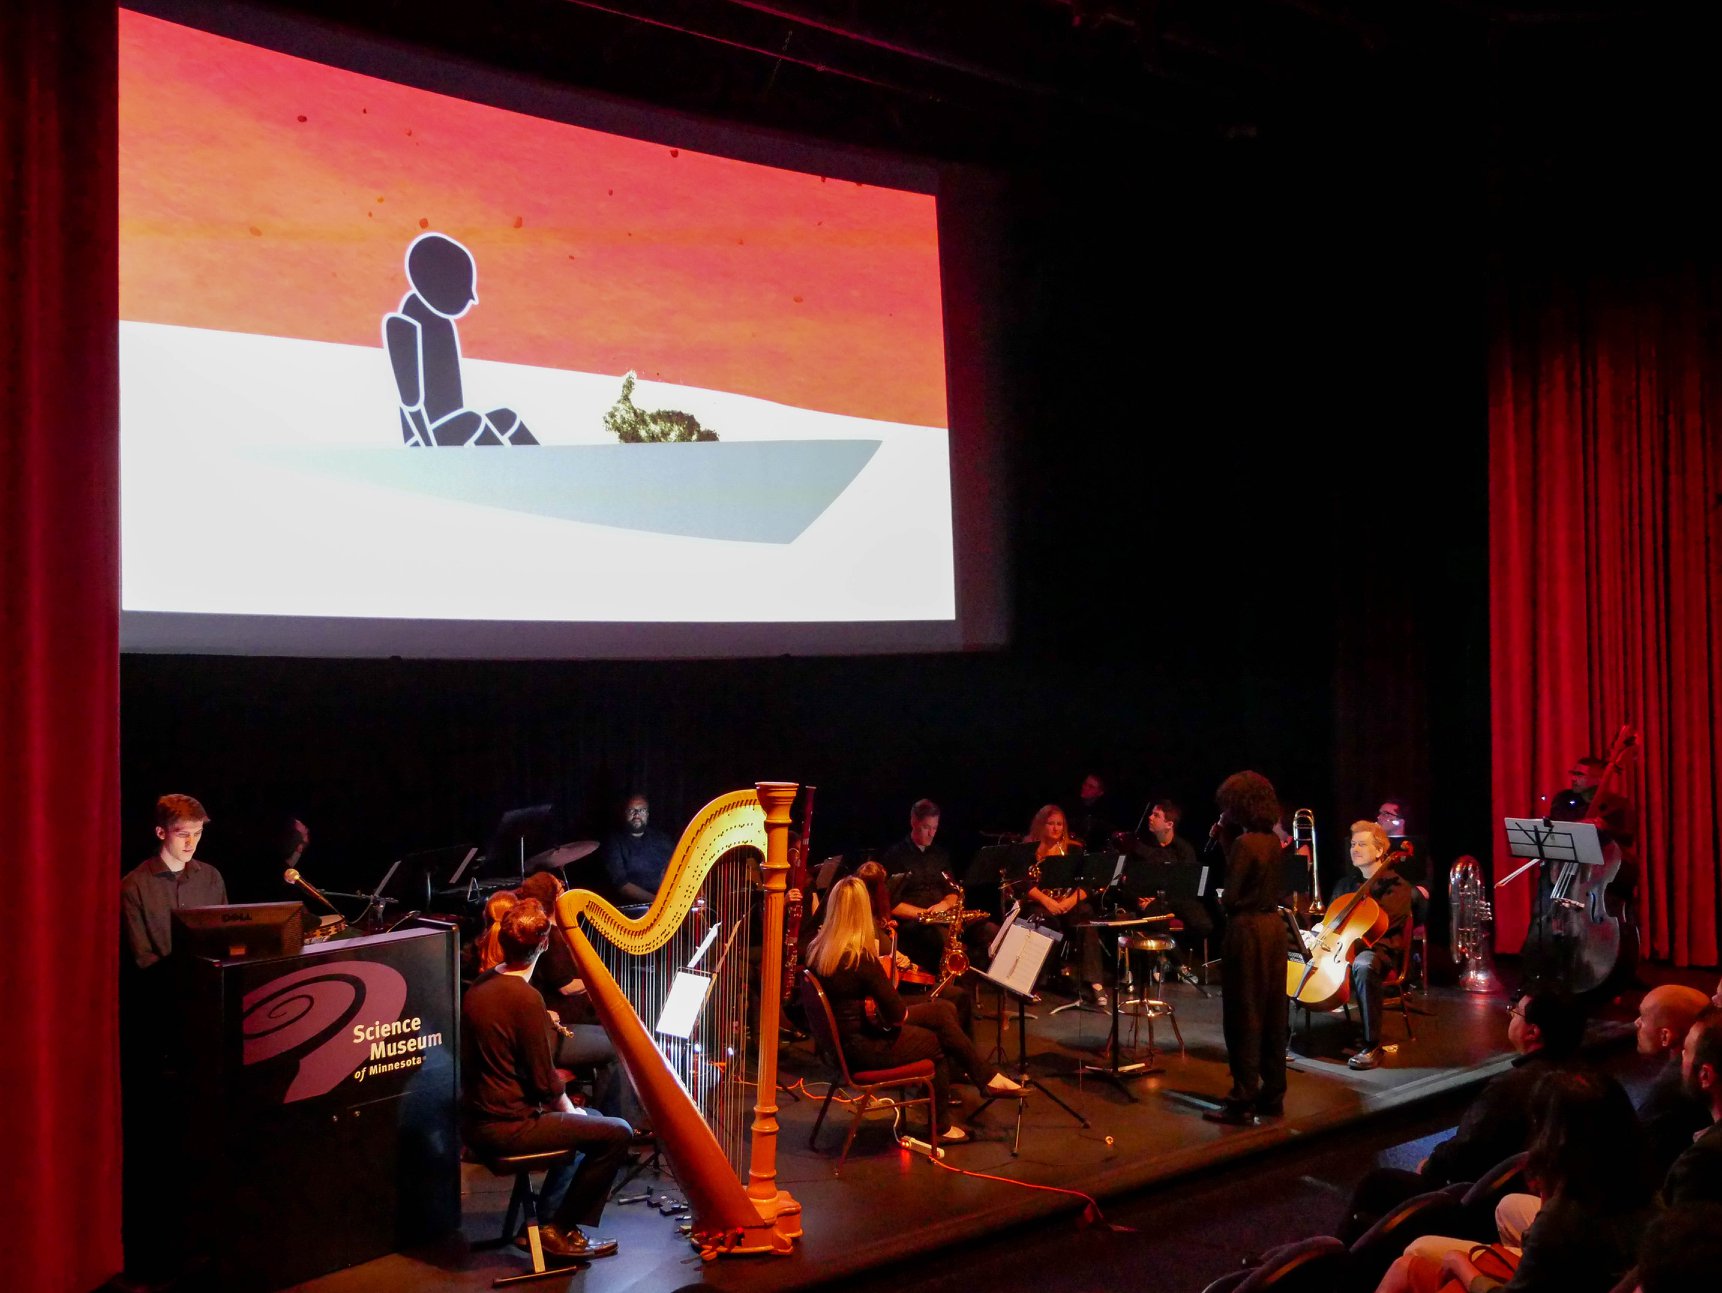 A theater stage with a group of musicians. A video is being projected behind them